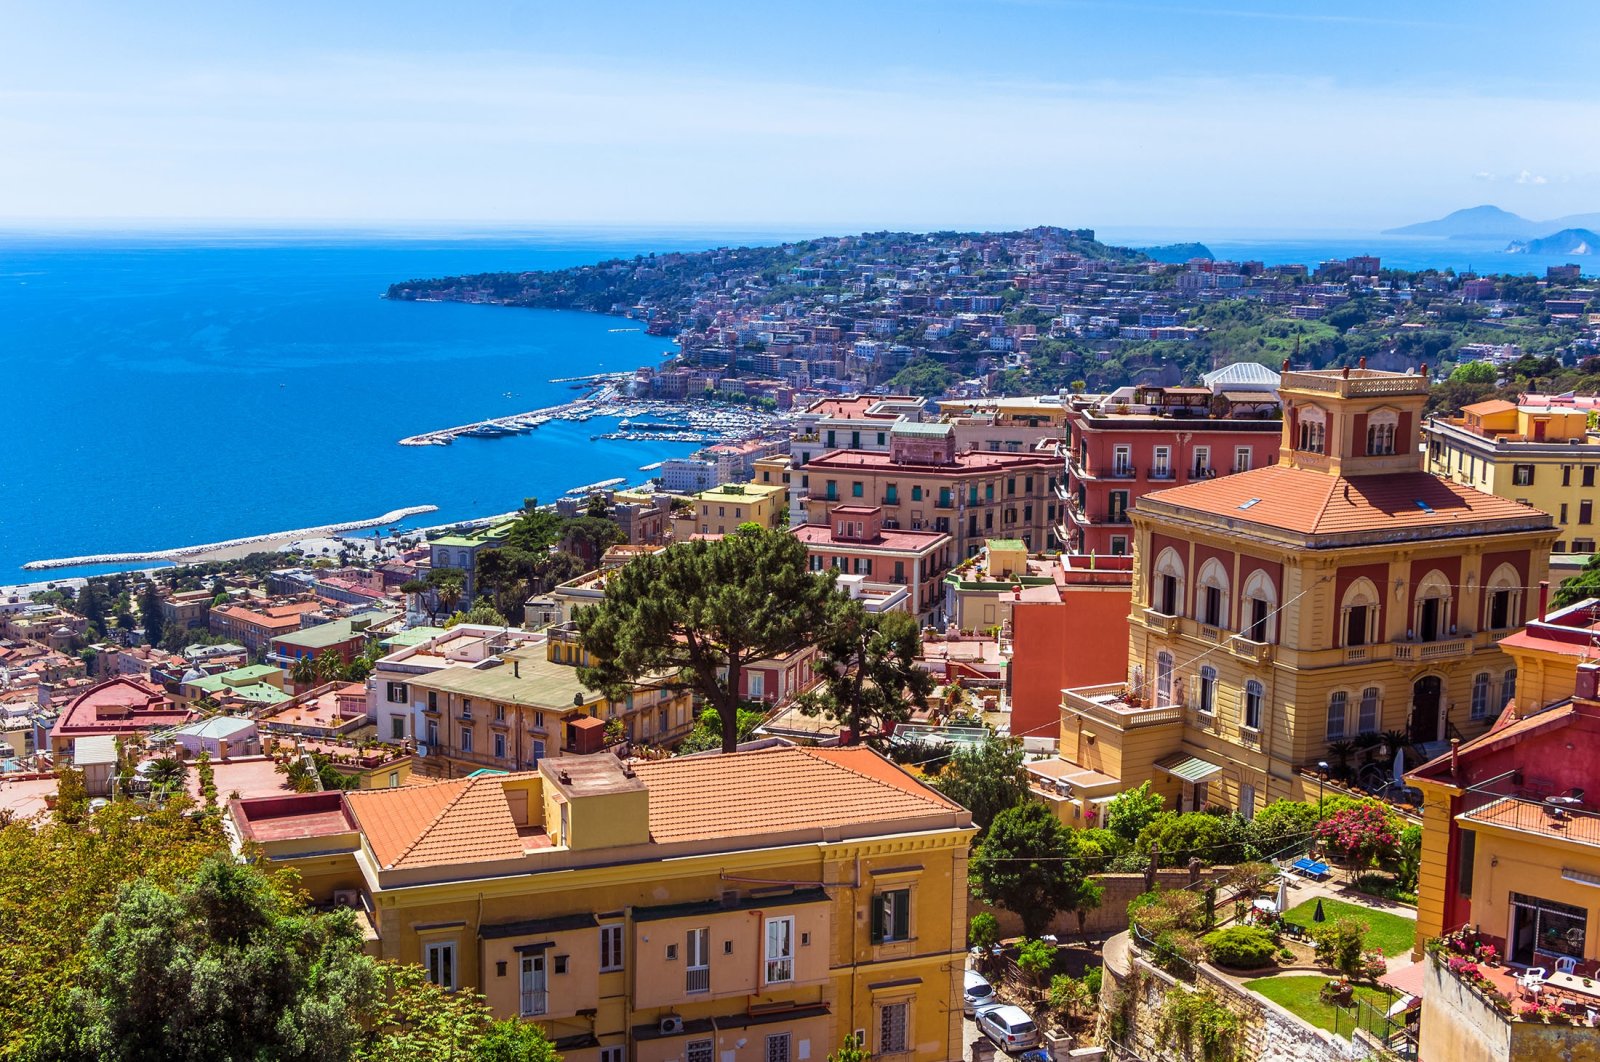 Naples fascinates its visitors with historical streets, churches, castles and the warmth of Mediterranean culture. (Shutterstock Photo)